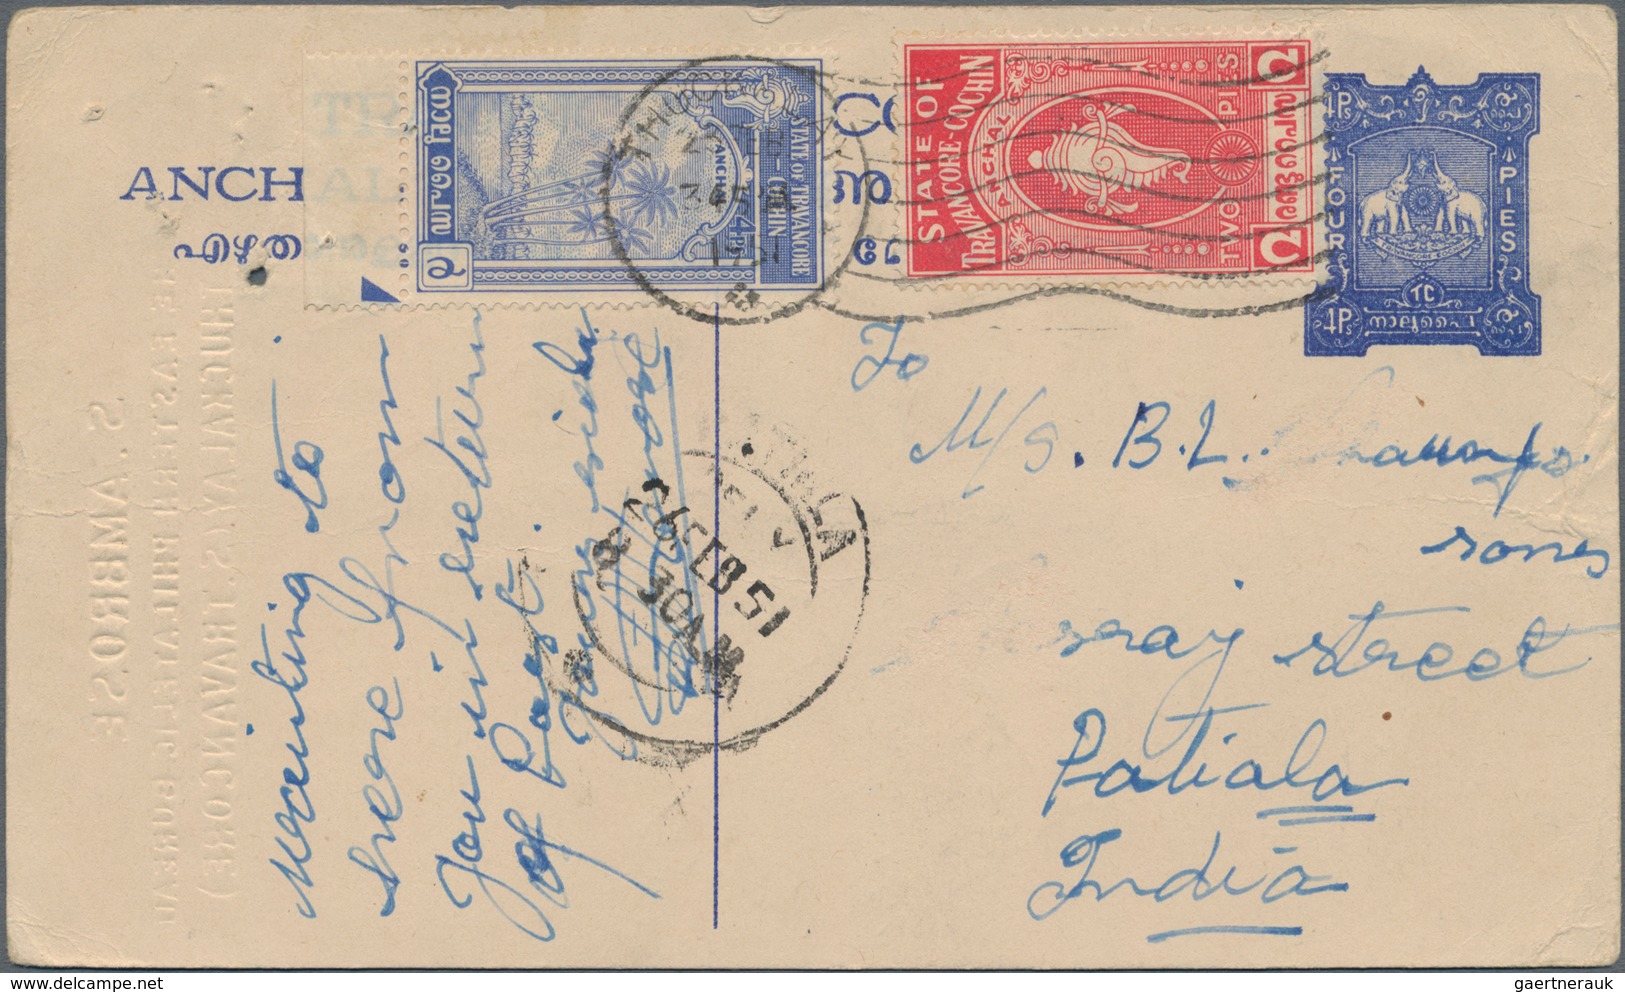 Indien - Feudalstaaten - Tranvancore-Cochin: TRAVANCORE-COCHIN 1949-50: Group of 50 covers and cards